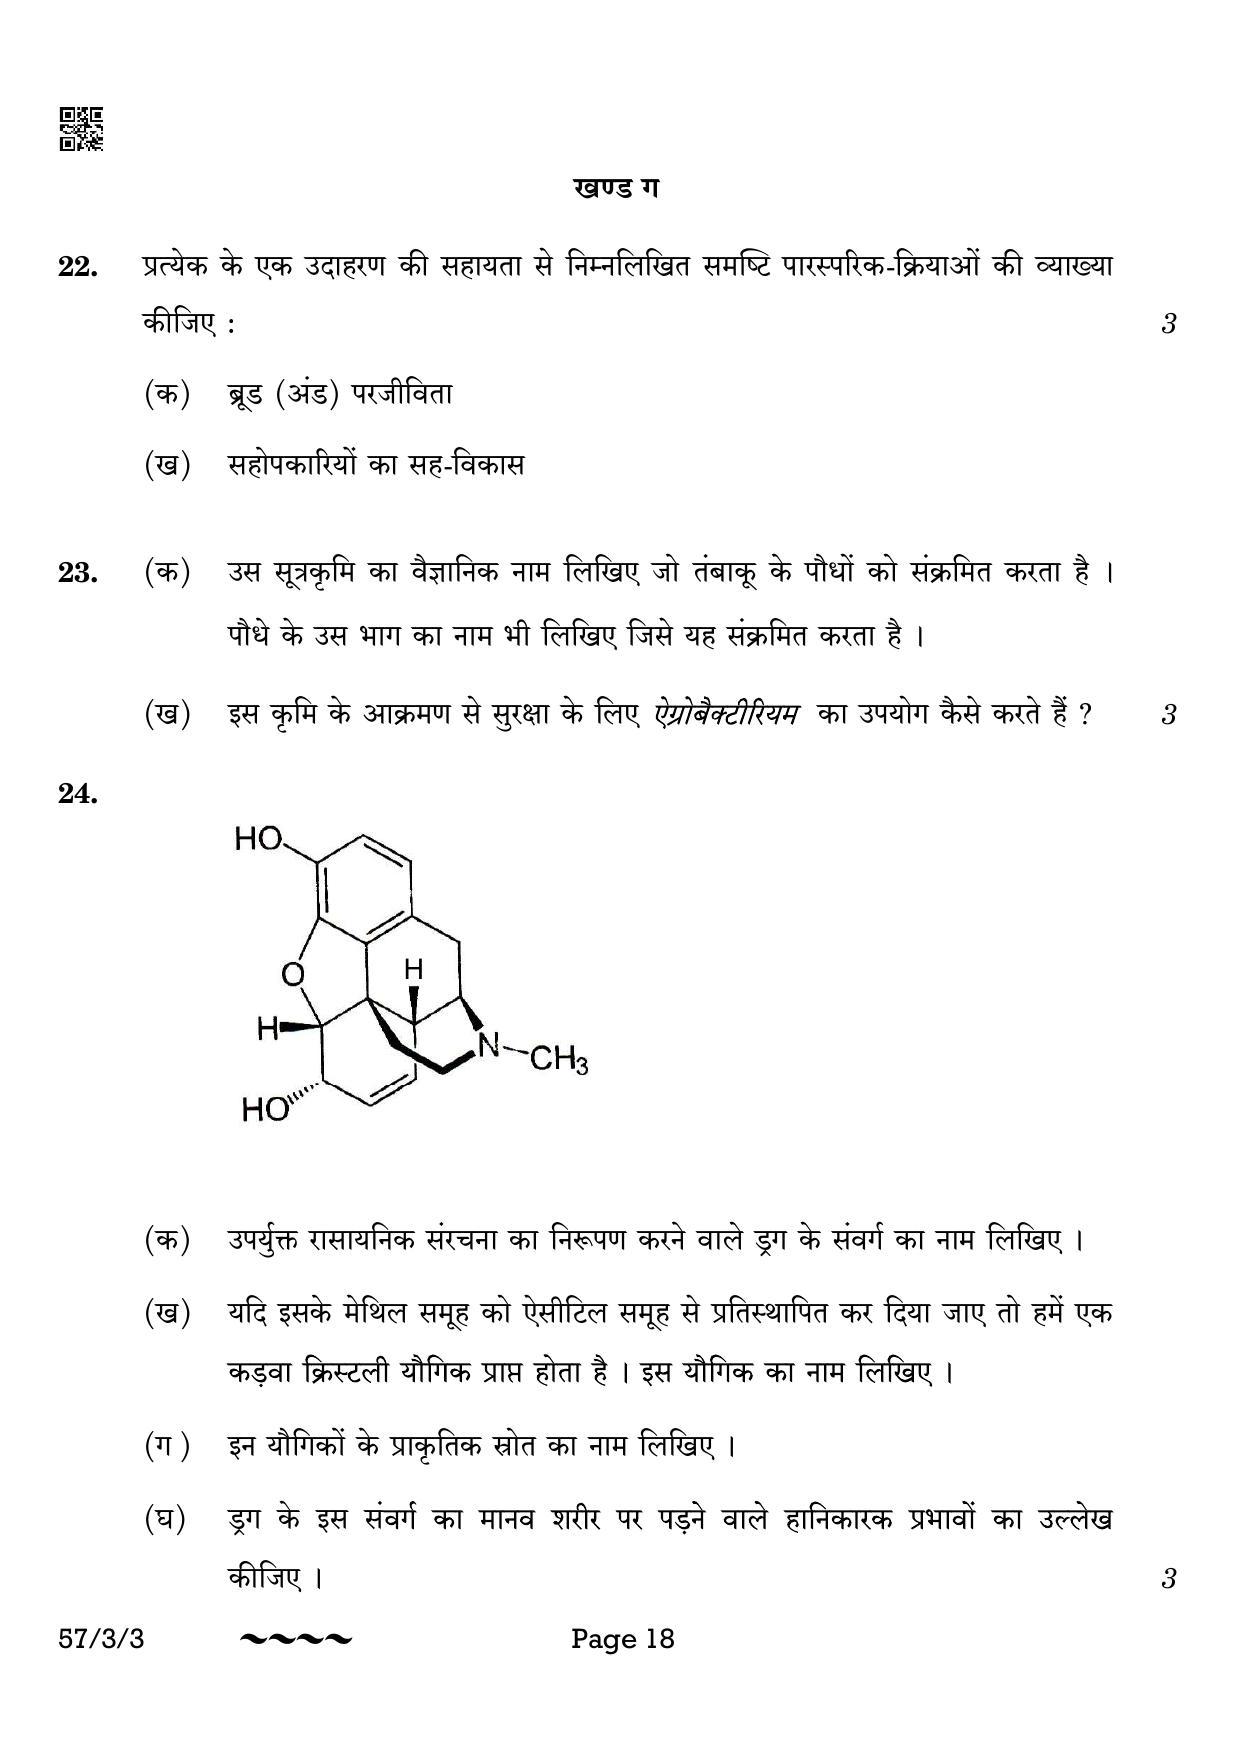 CBSE Class 12 57-3-3 Biology 2023 Question Paper - Page 18